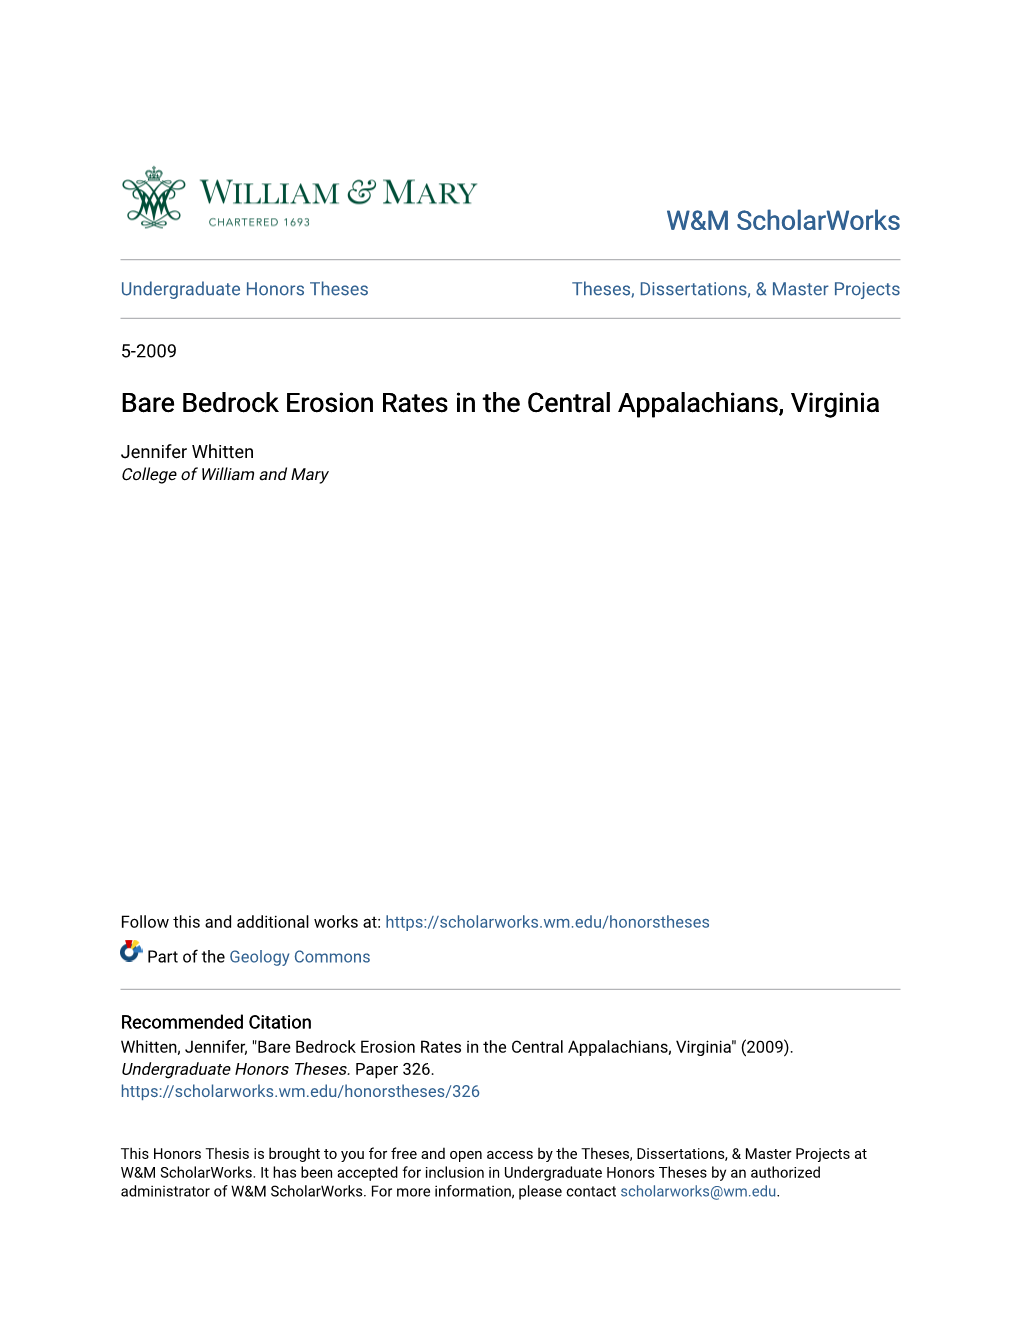 Bare Bedrock Erosion Rates in the Central Appalachians, Virginia